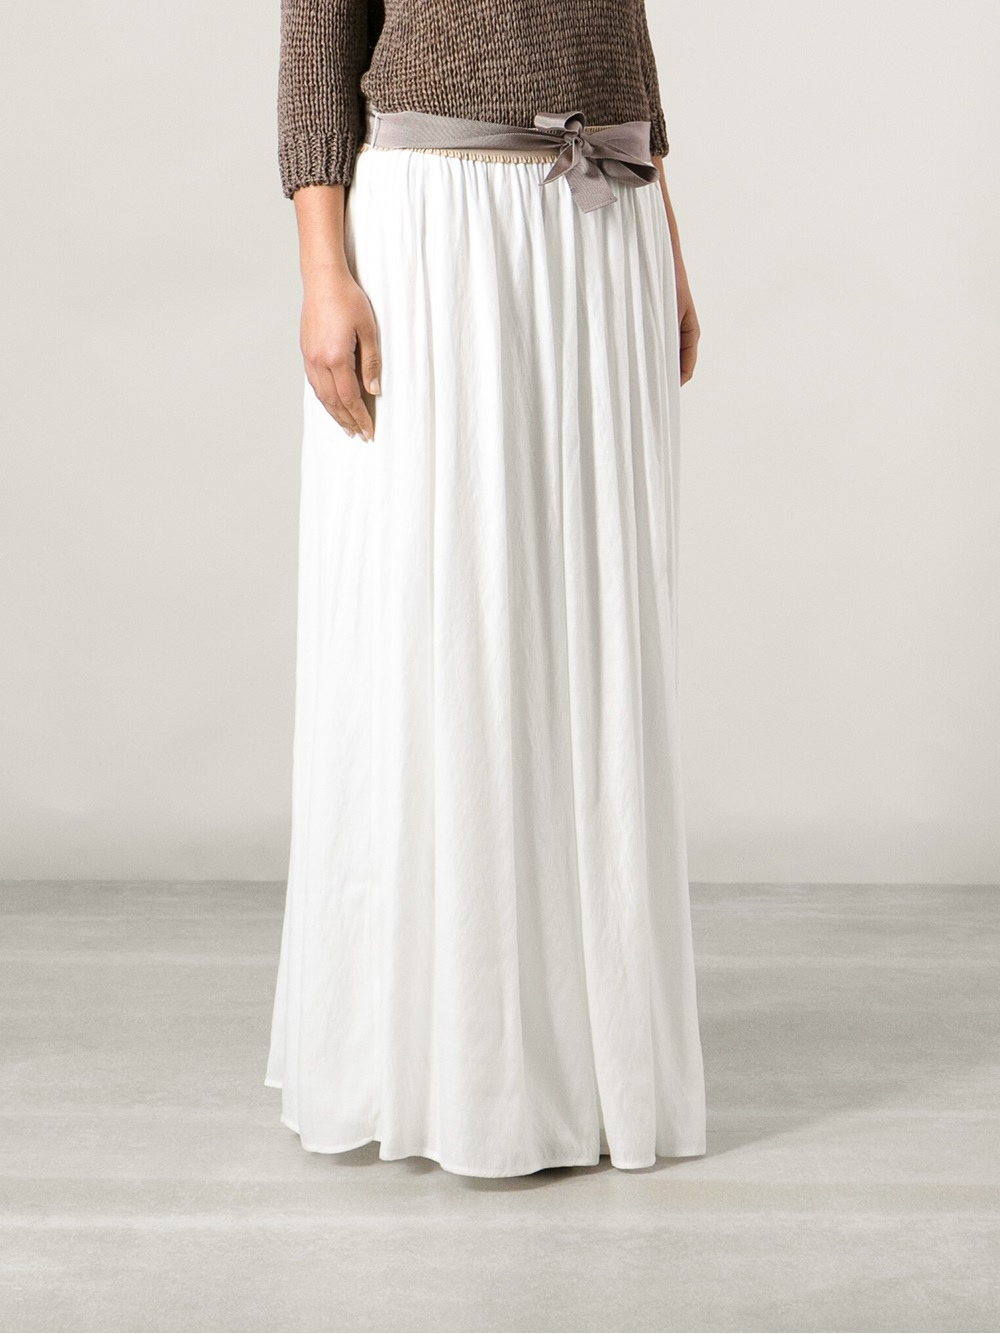 Woolrich Long Pleated Skirt In White Lyst 4508